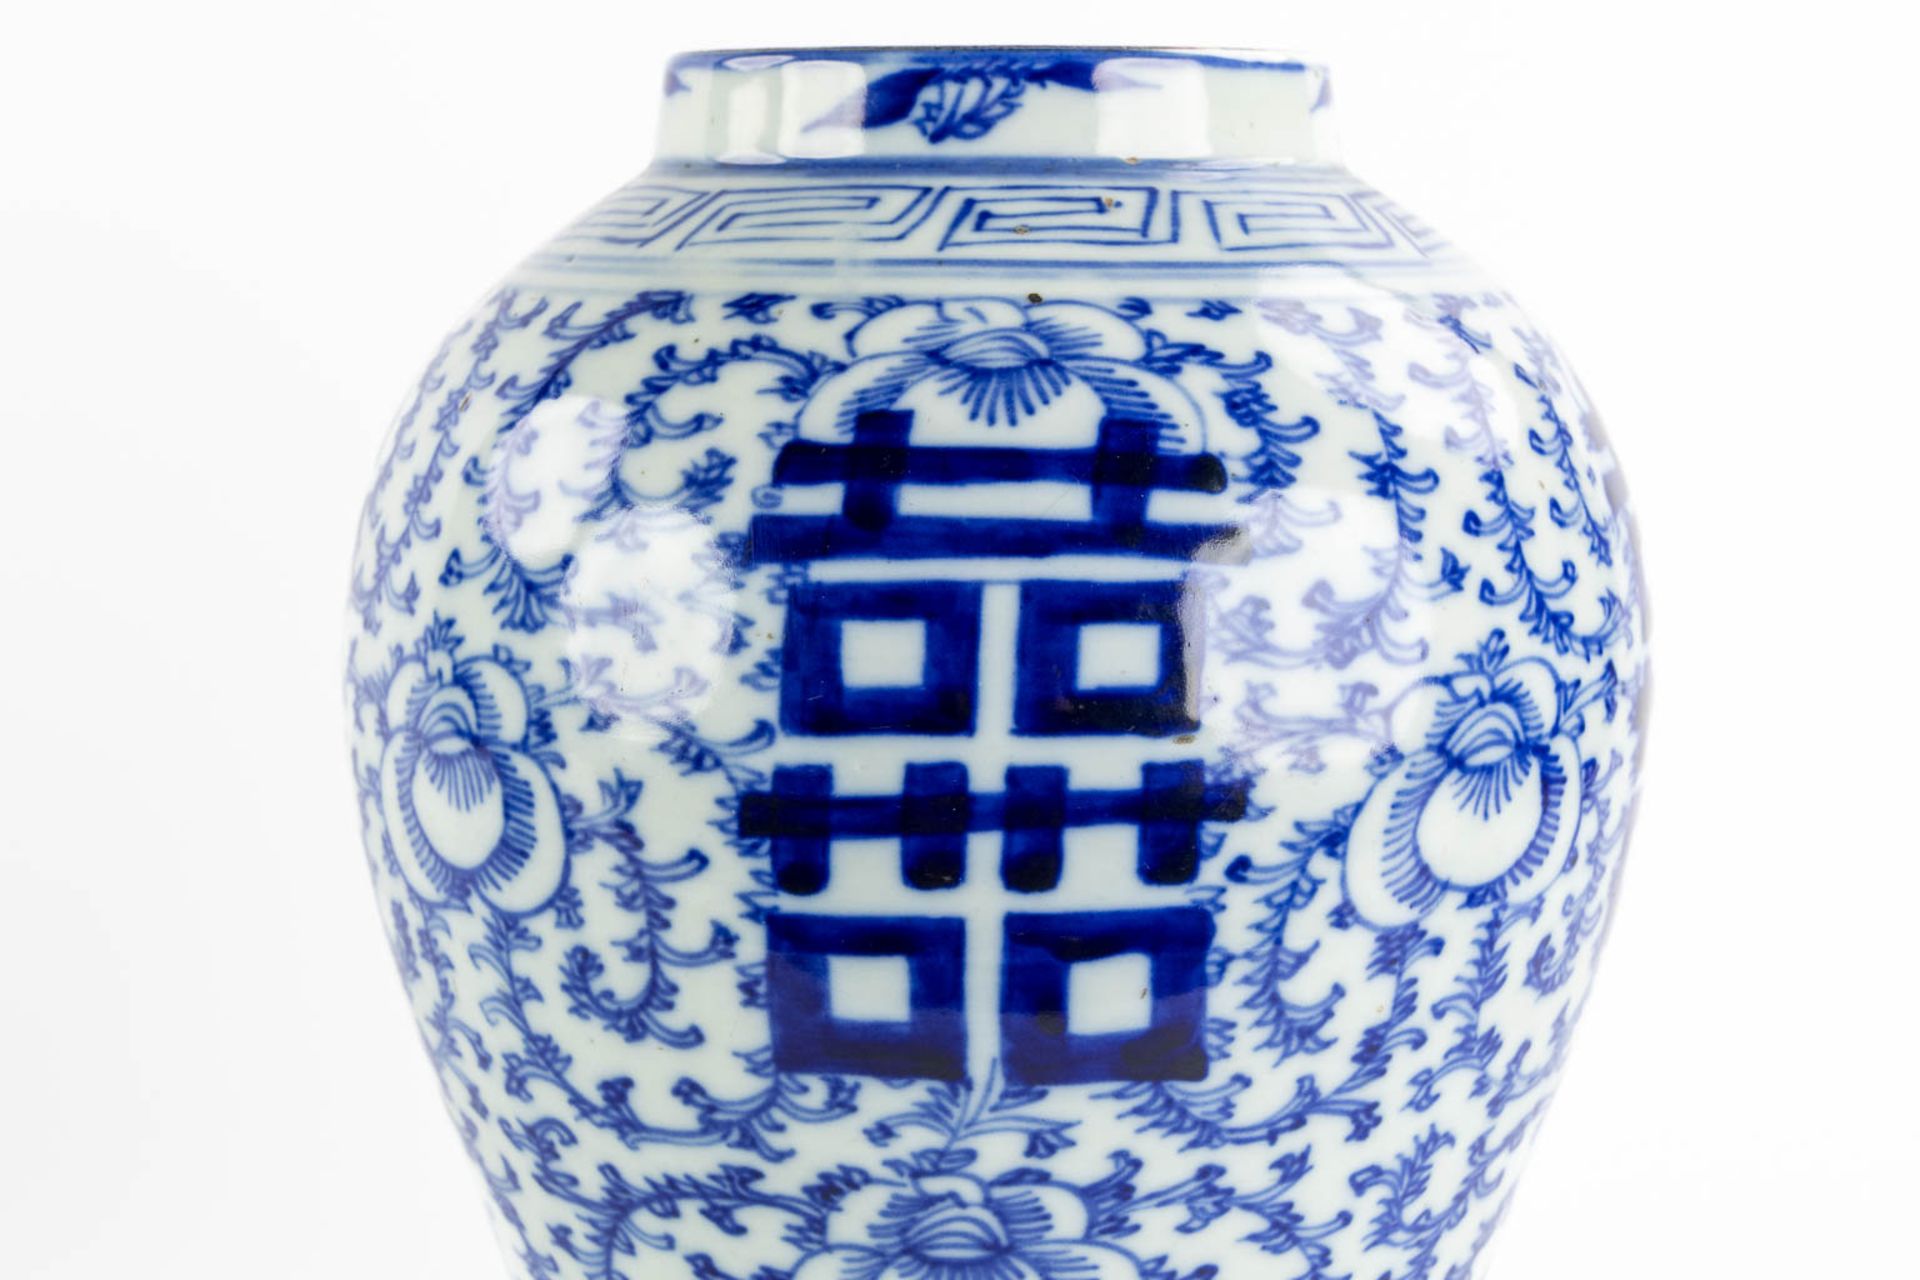 A pair of Chinese vases with a blue-white decor and a Double Xi-sign. 19th/20th C. (H:41 x D:26 cm) - Image 8 of 8